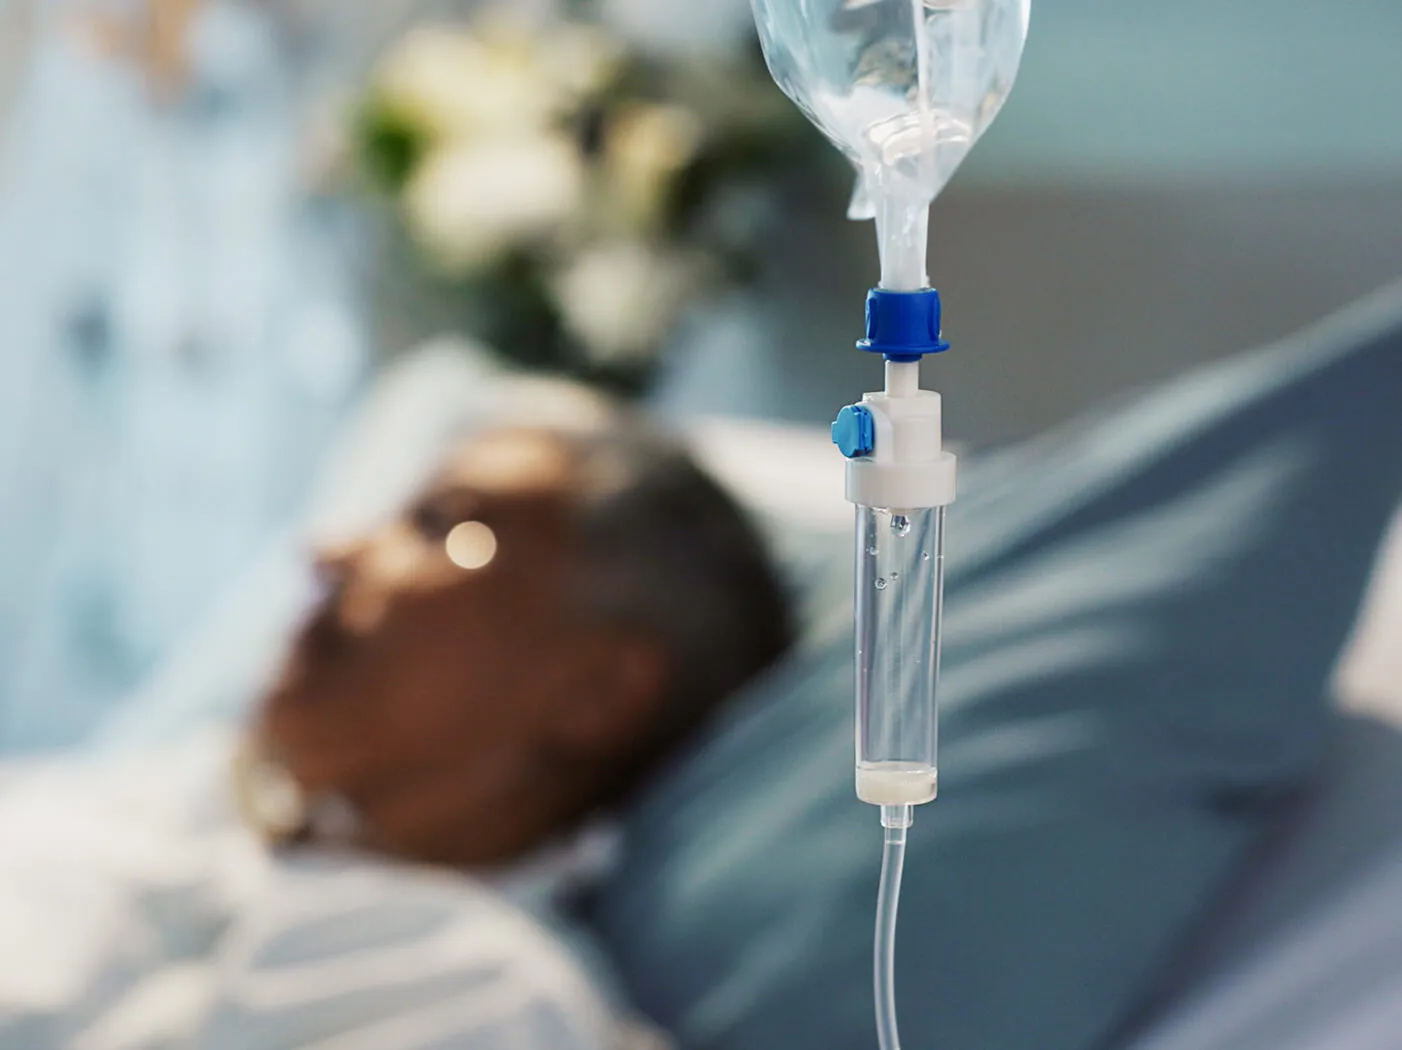 A drip line in the foreground and a bed bound hospital patient in the background